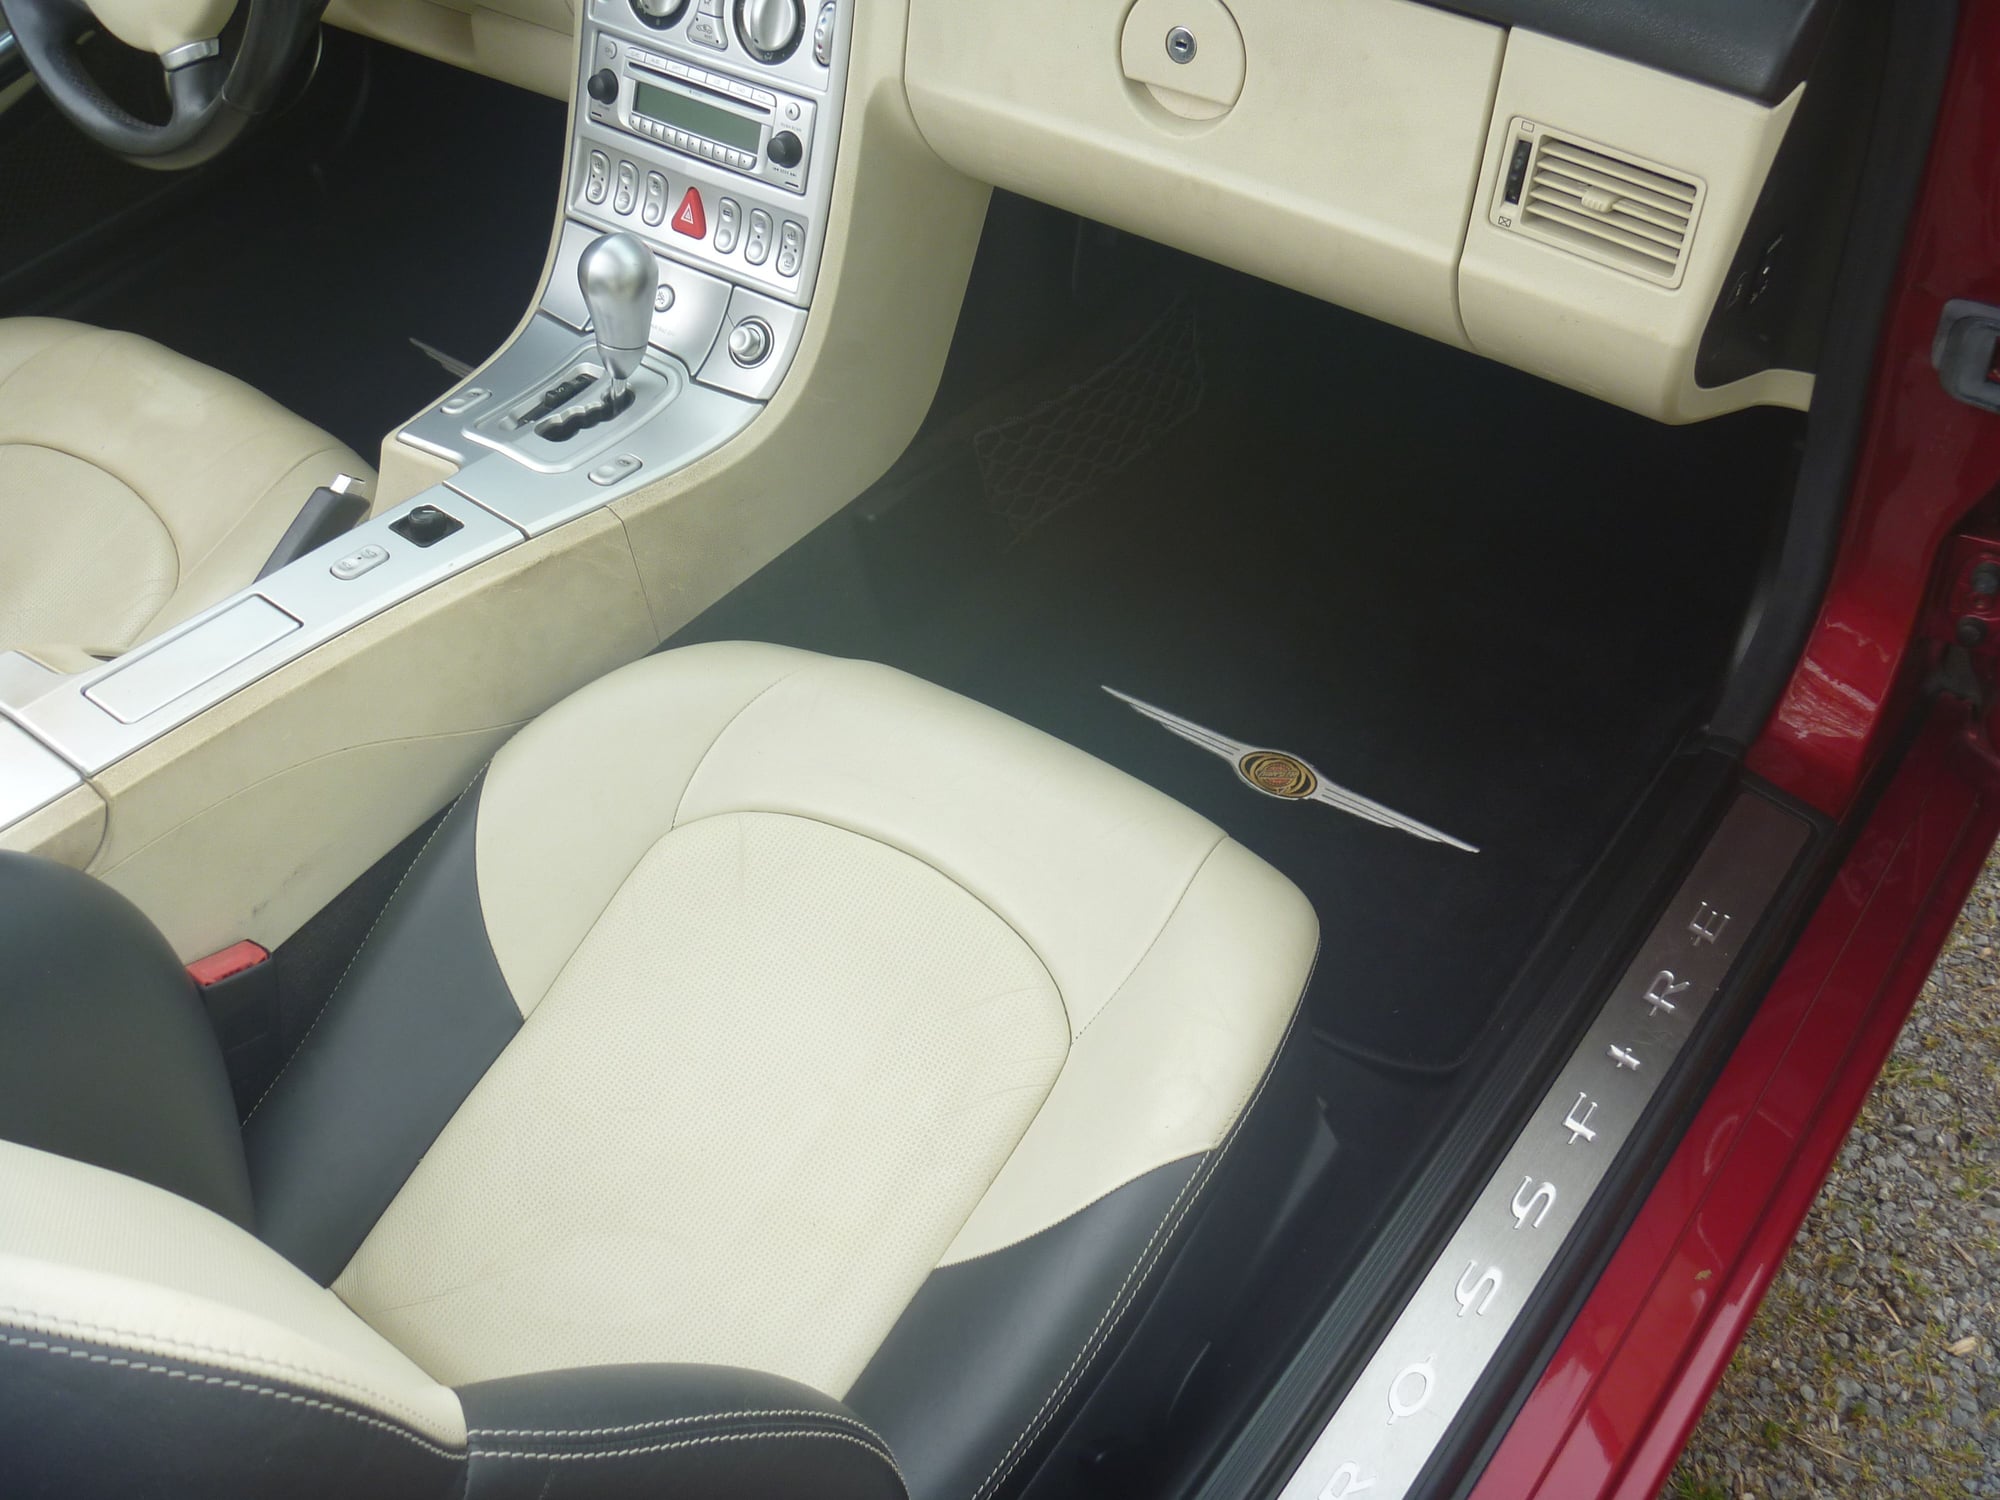 2006 Chrysler Crossfire - 2006 Crossfire Limited Roadster - Used - VIN 1C3AN65L46X064199 - 6 cyl - 2WD - Automatic - Convertible - Red - Avon, NY 14414, United States